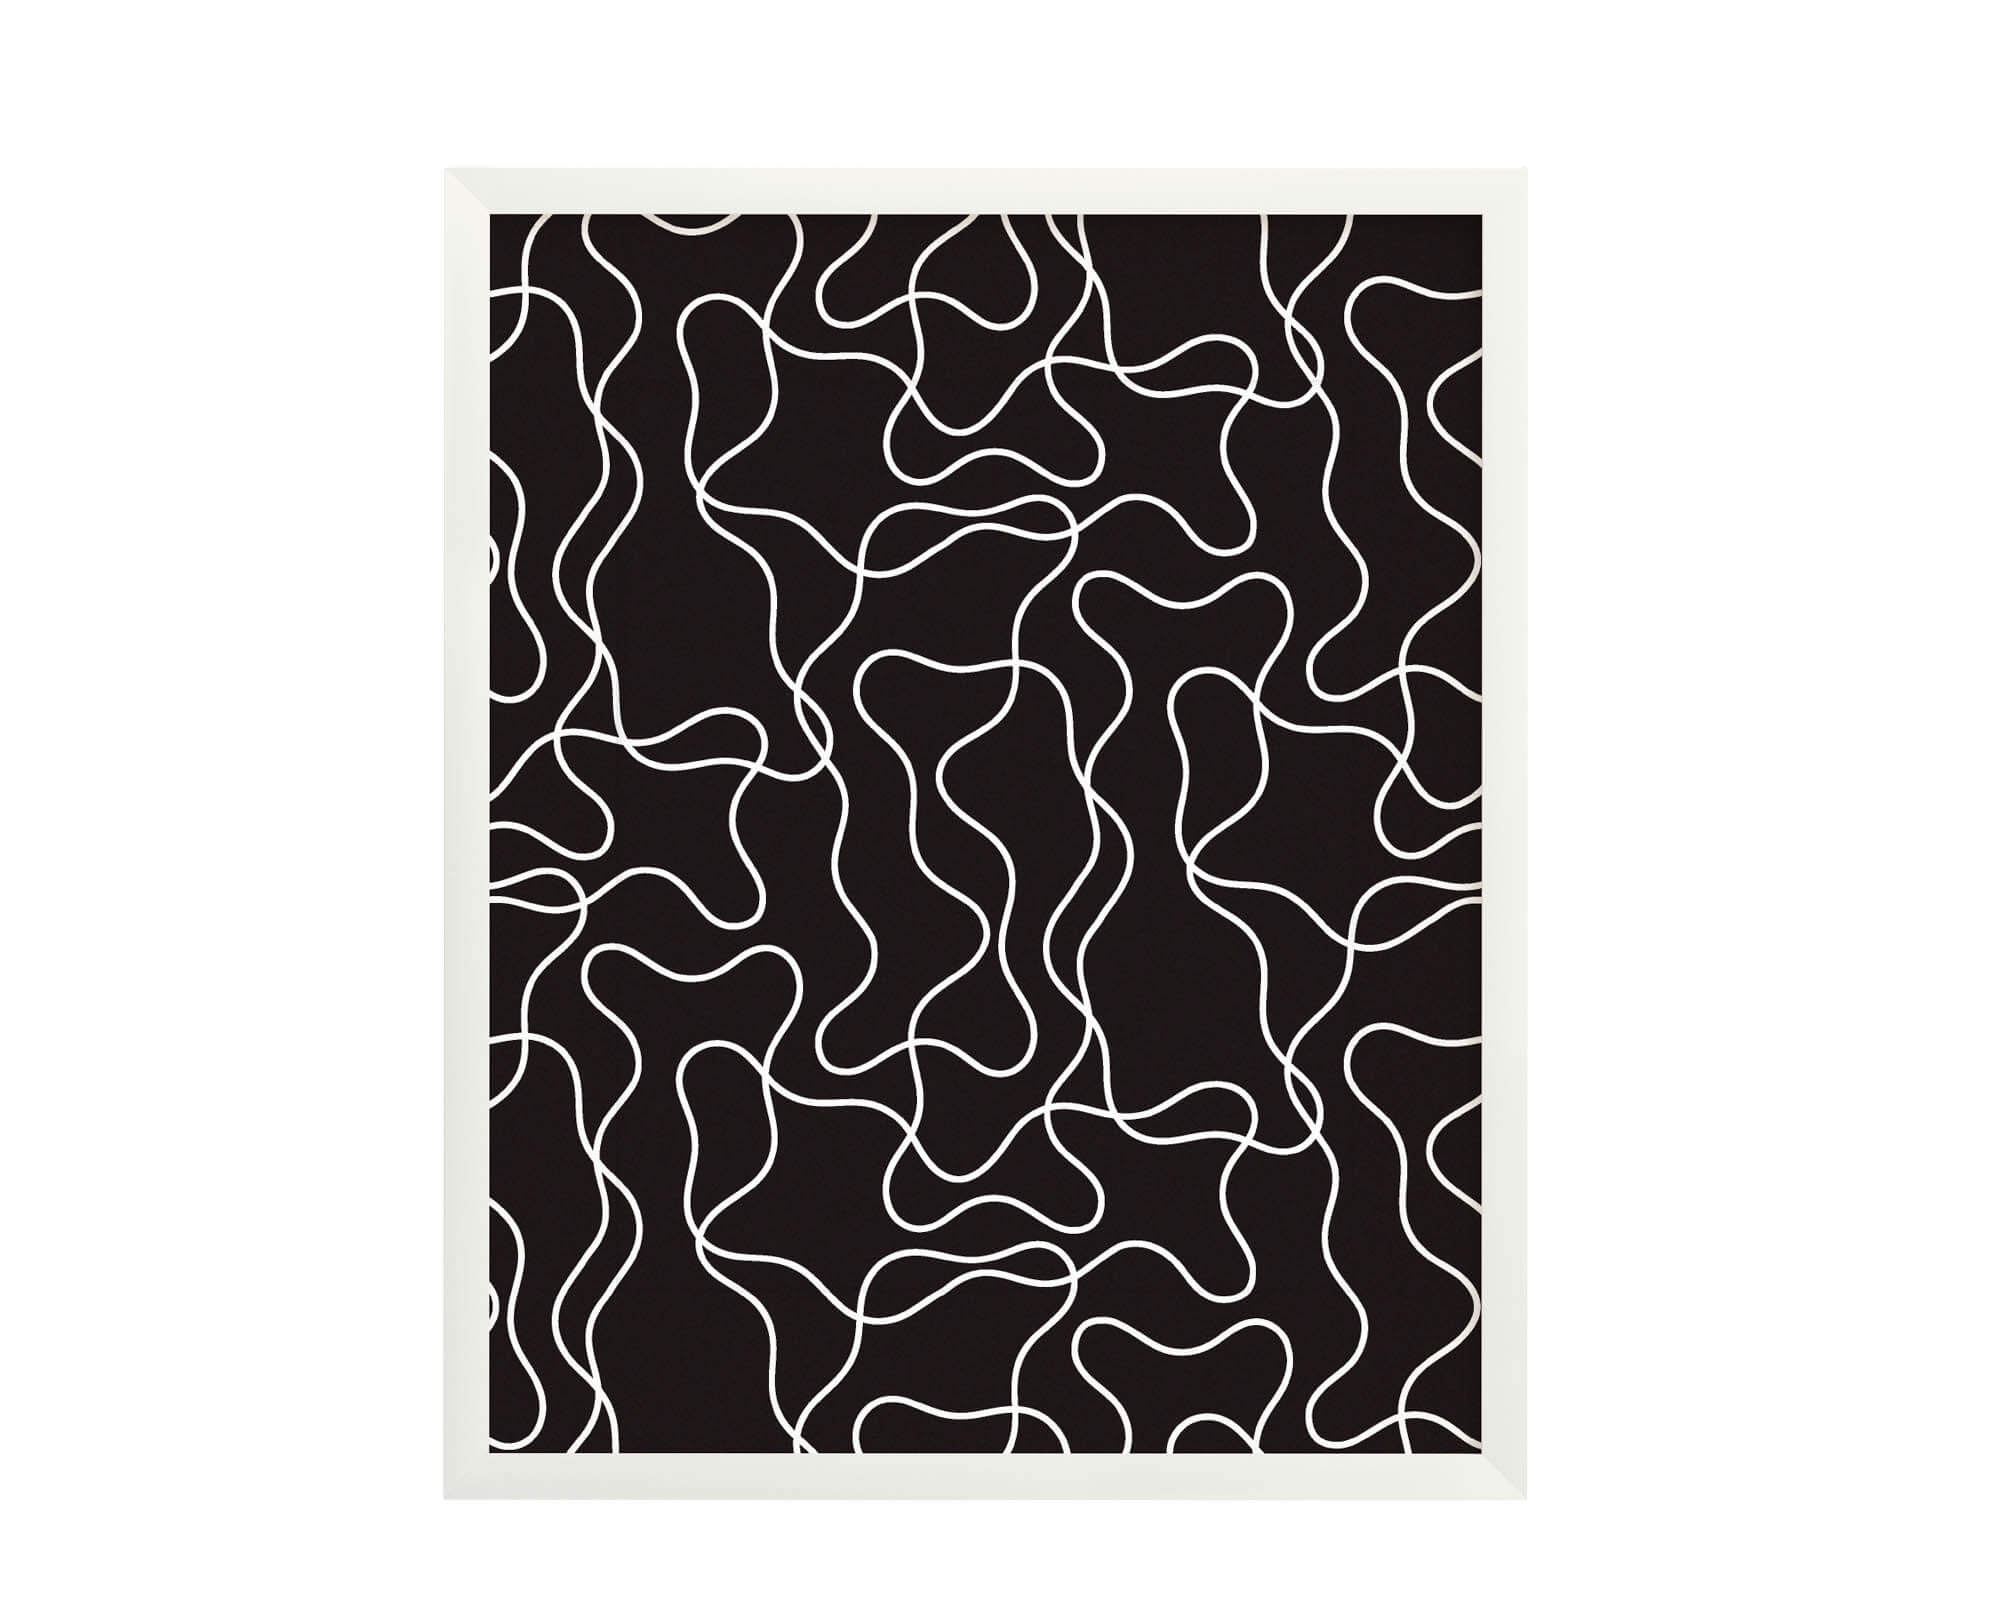 "Magic Squiggle" graphic black and white squiggle pattern archival giclée modern art print. Made in USA by My Darlin' @mydarlin_bk